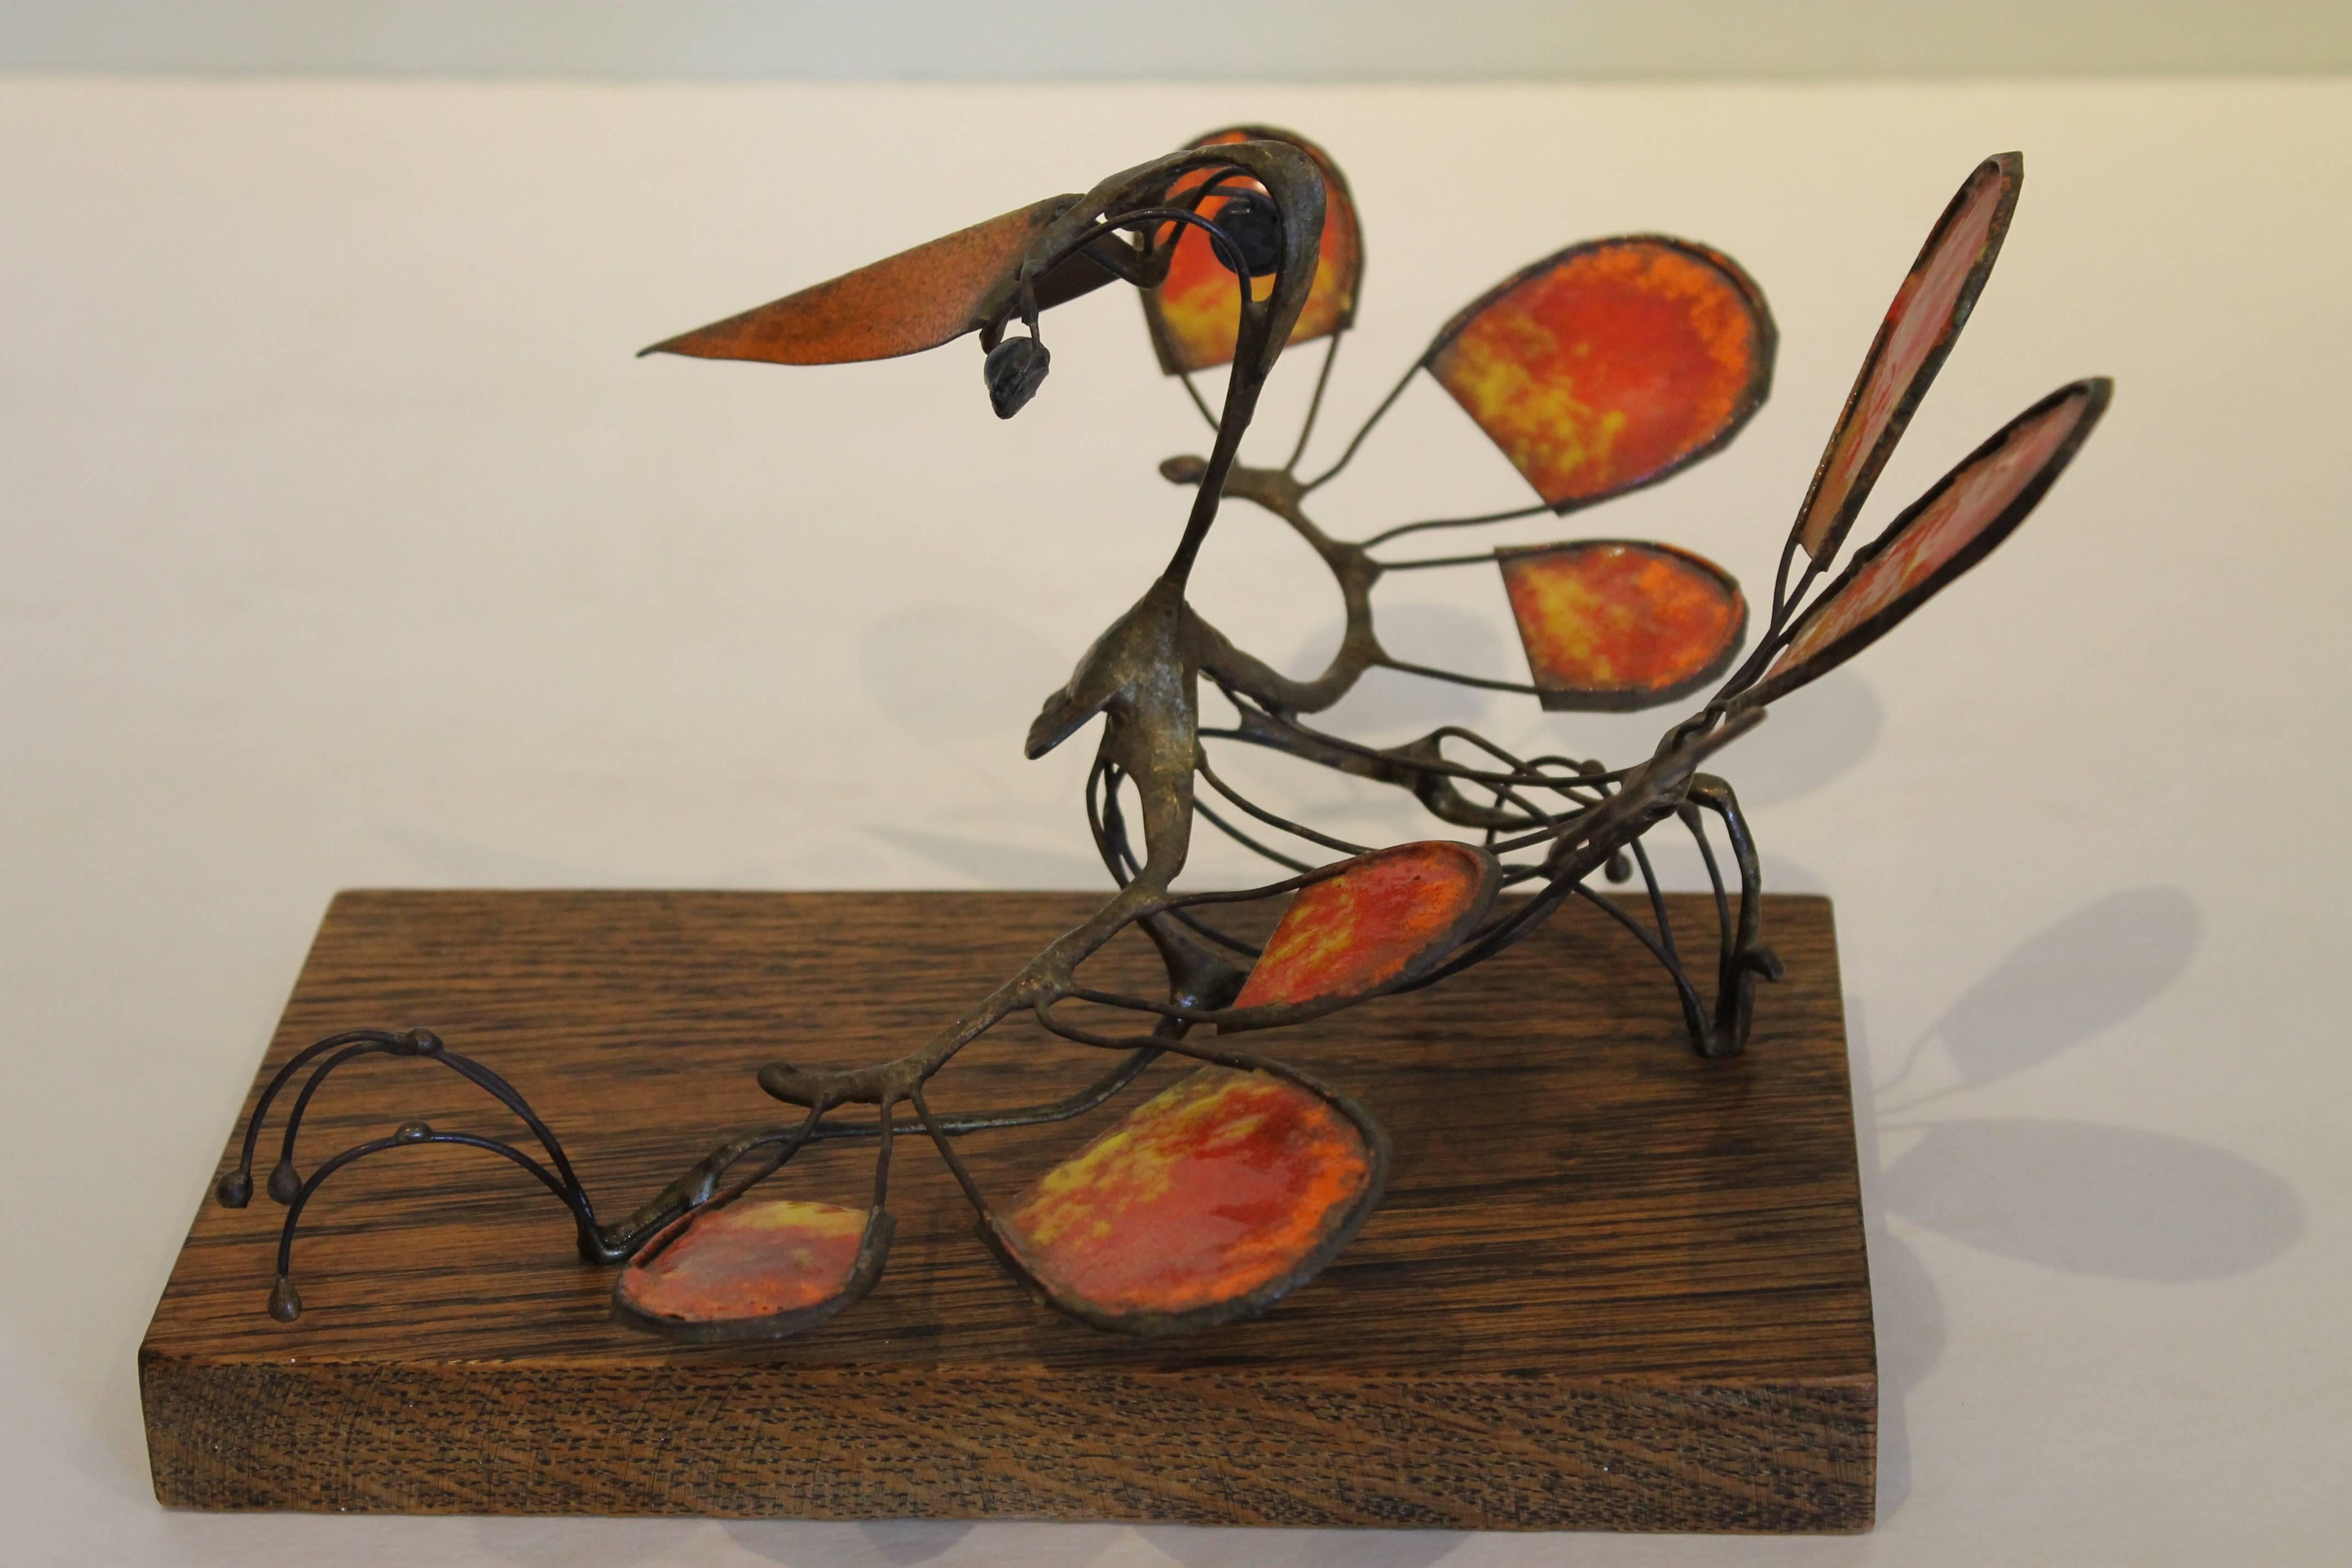 Mid-20th Century Copper and Enamel Bird Sculpture by Russ Shears